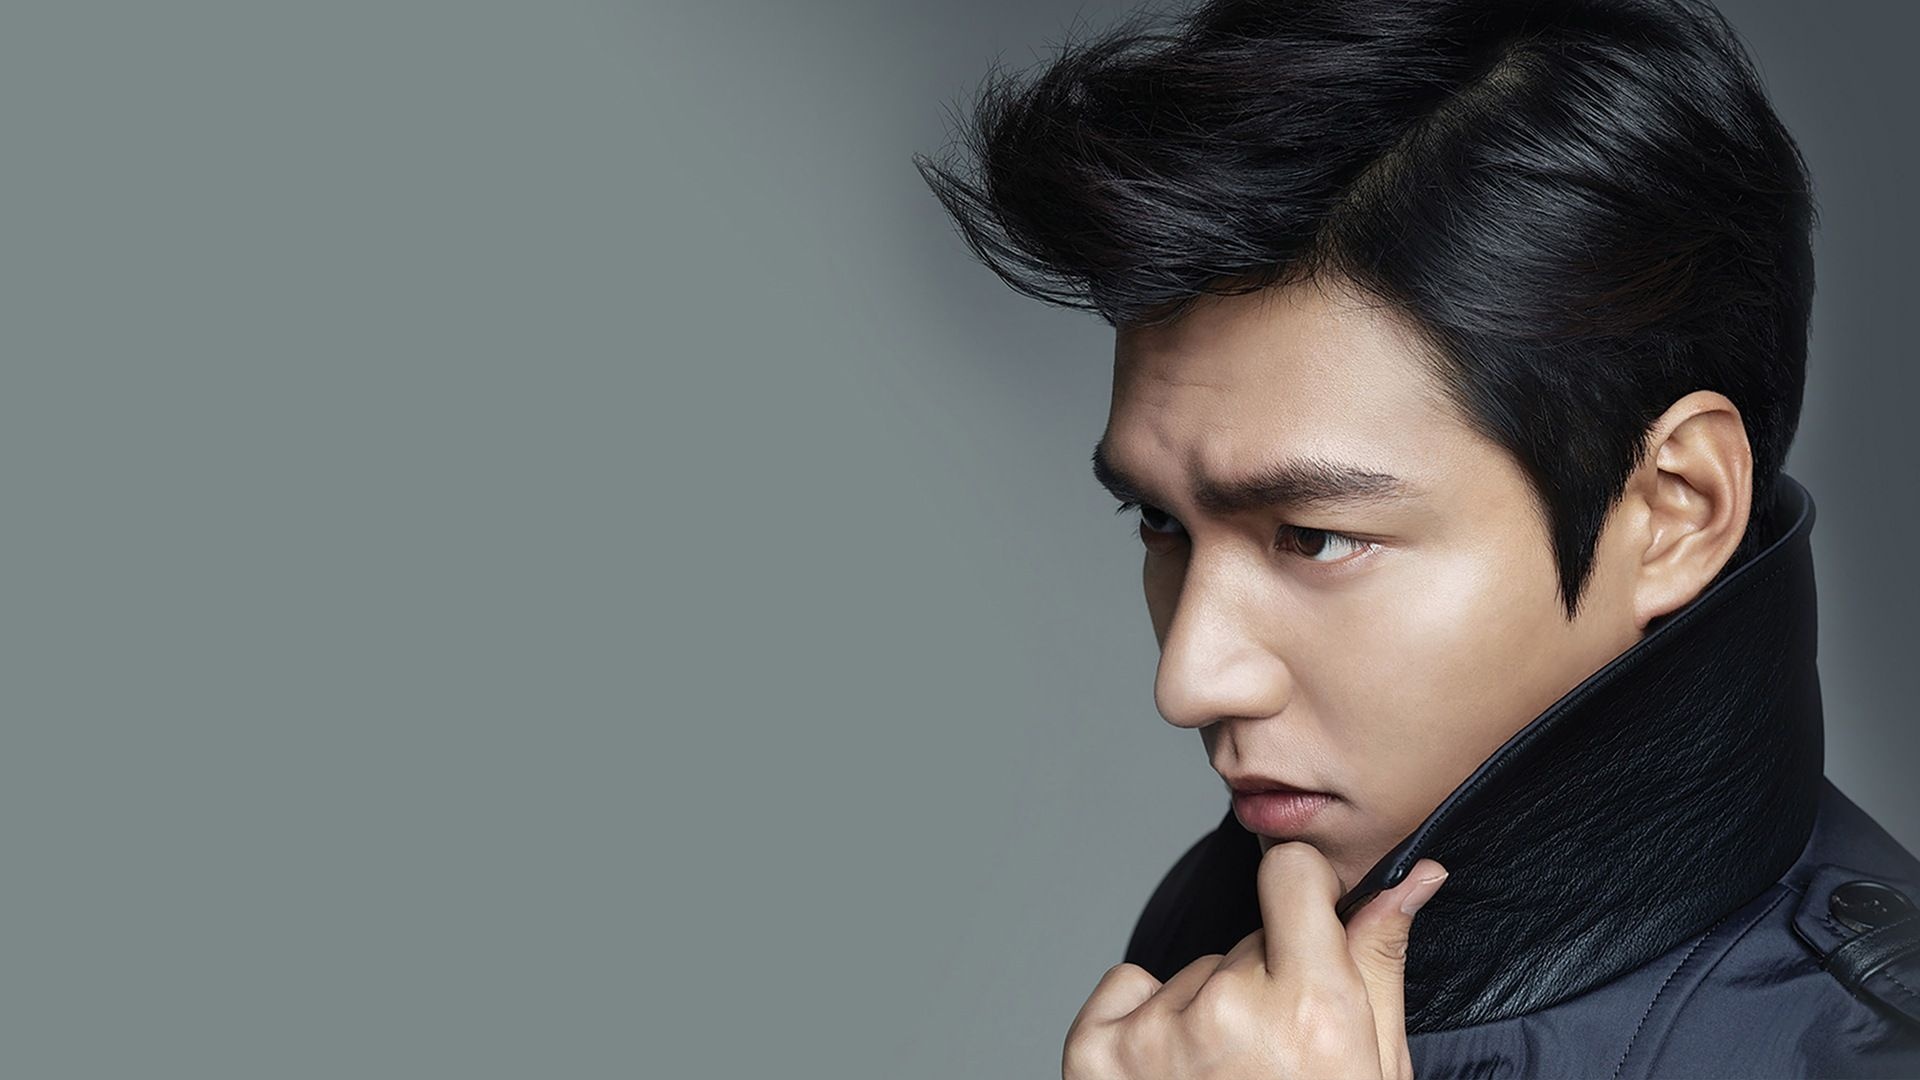 Lee Min-ho: K-drama actor, Played an emperor in the recent romantic fantasy television series The King: Eternal Monarch, 2020. 1920x1080 Full HD Wallpaper.